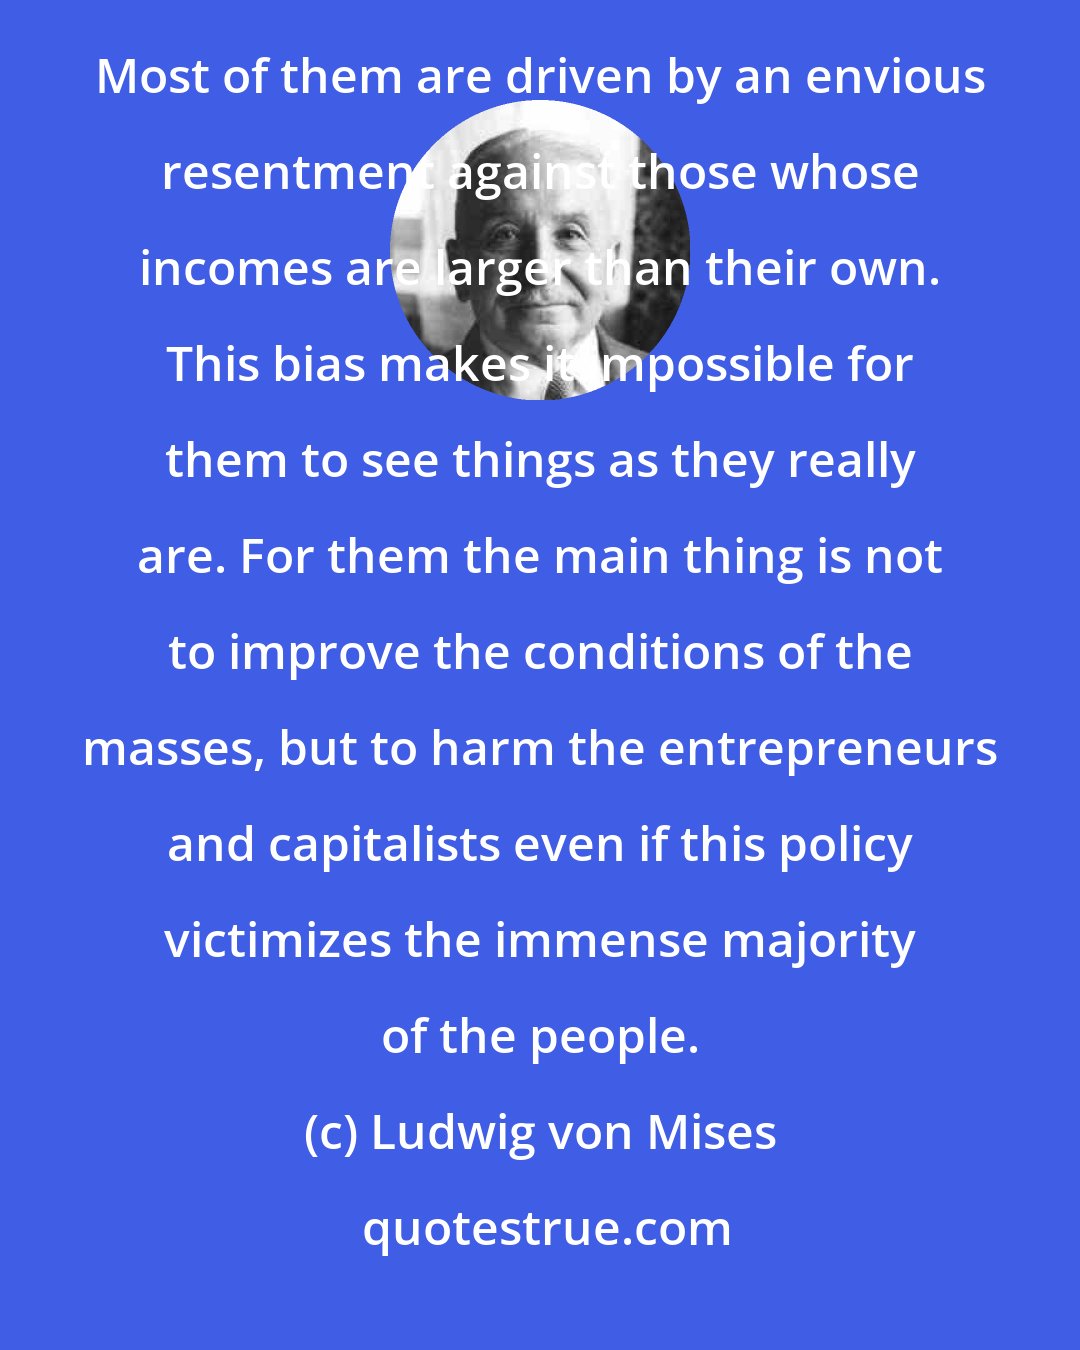 Ludwig von Mises: The interventionists do not approach the study of economic matters with scientific disinterestedness. Most of them are driven by an envious resentment against those whose incomes are larger than their own. This bias makes it impossible for them to see things as they really are. For them the main thing is not to improve the conditions of the masses, but to harm the entrepreneurs and capitalists even if this policy victimizes the immense majority of the people.